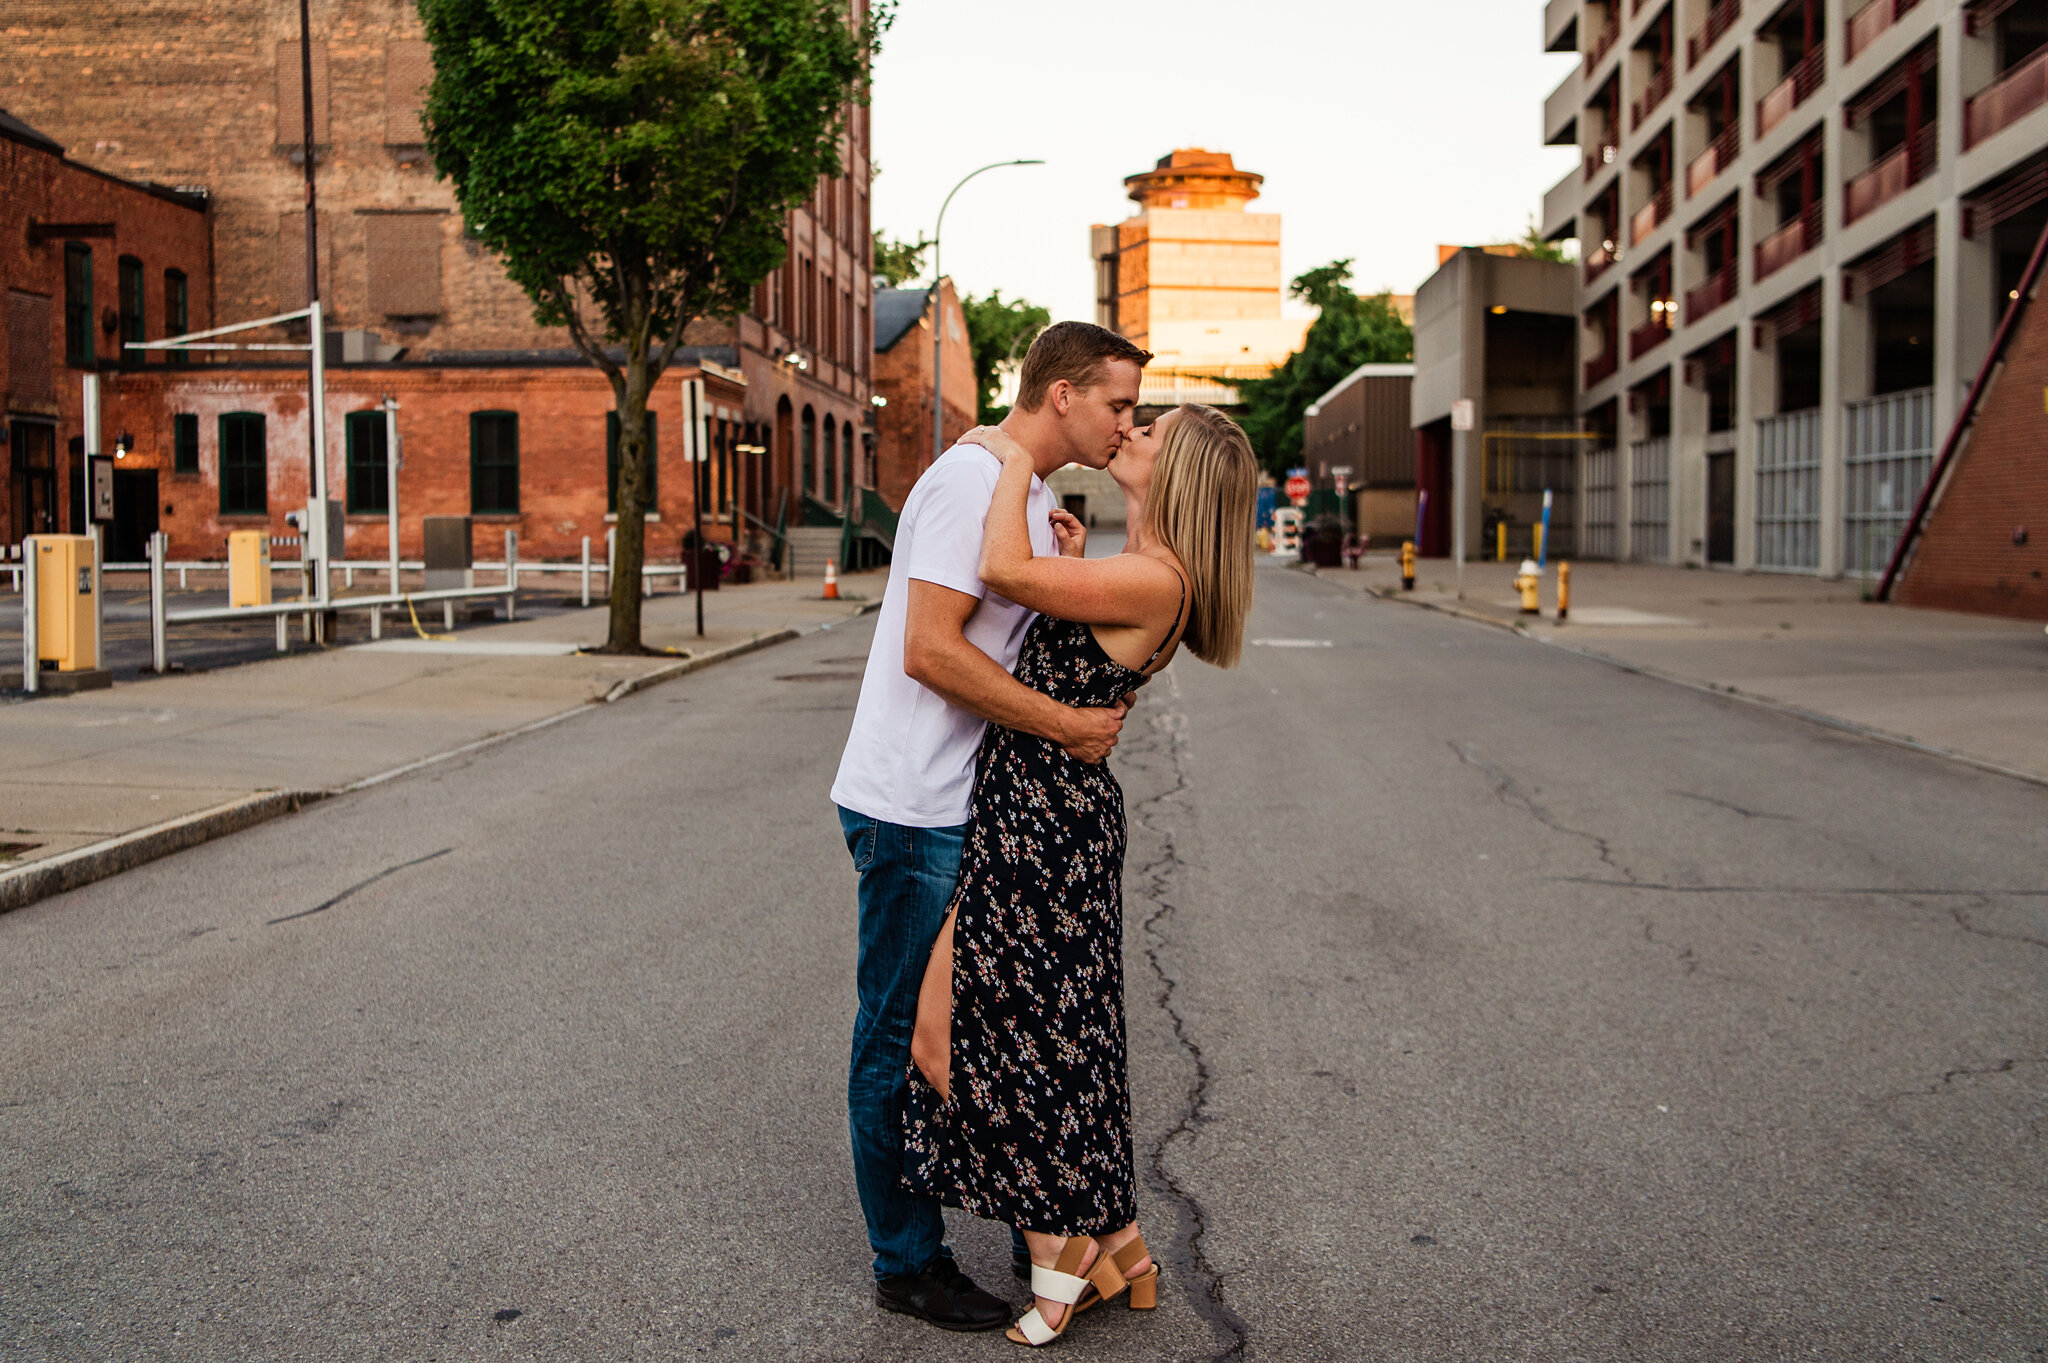 Genesee_Brew_House_High_Falls_Rochester_Engagement_Session_JILL_STUDIO_Rochester_NY_Photographer_5879.jpg